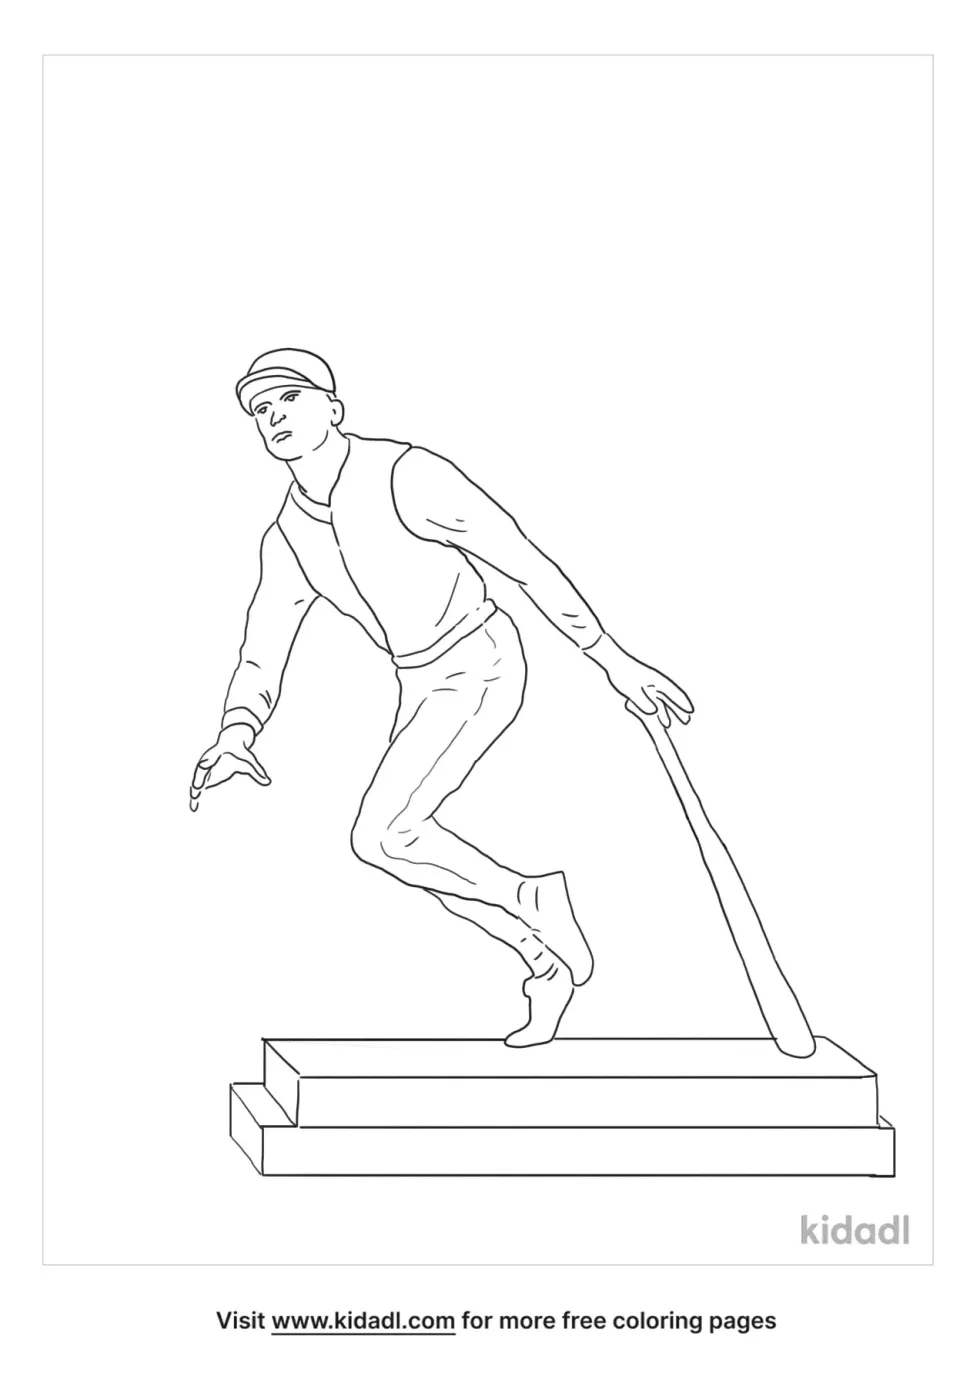 Roberto Clemente Award Coloring Page